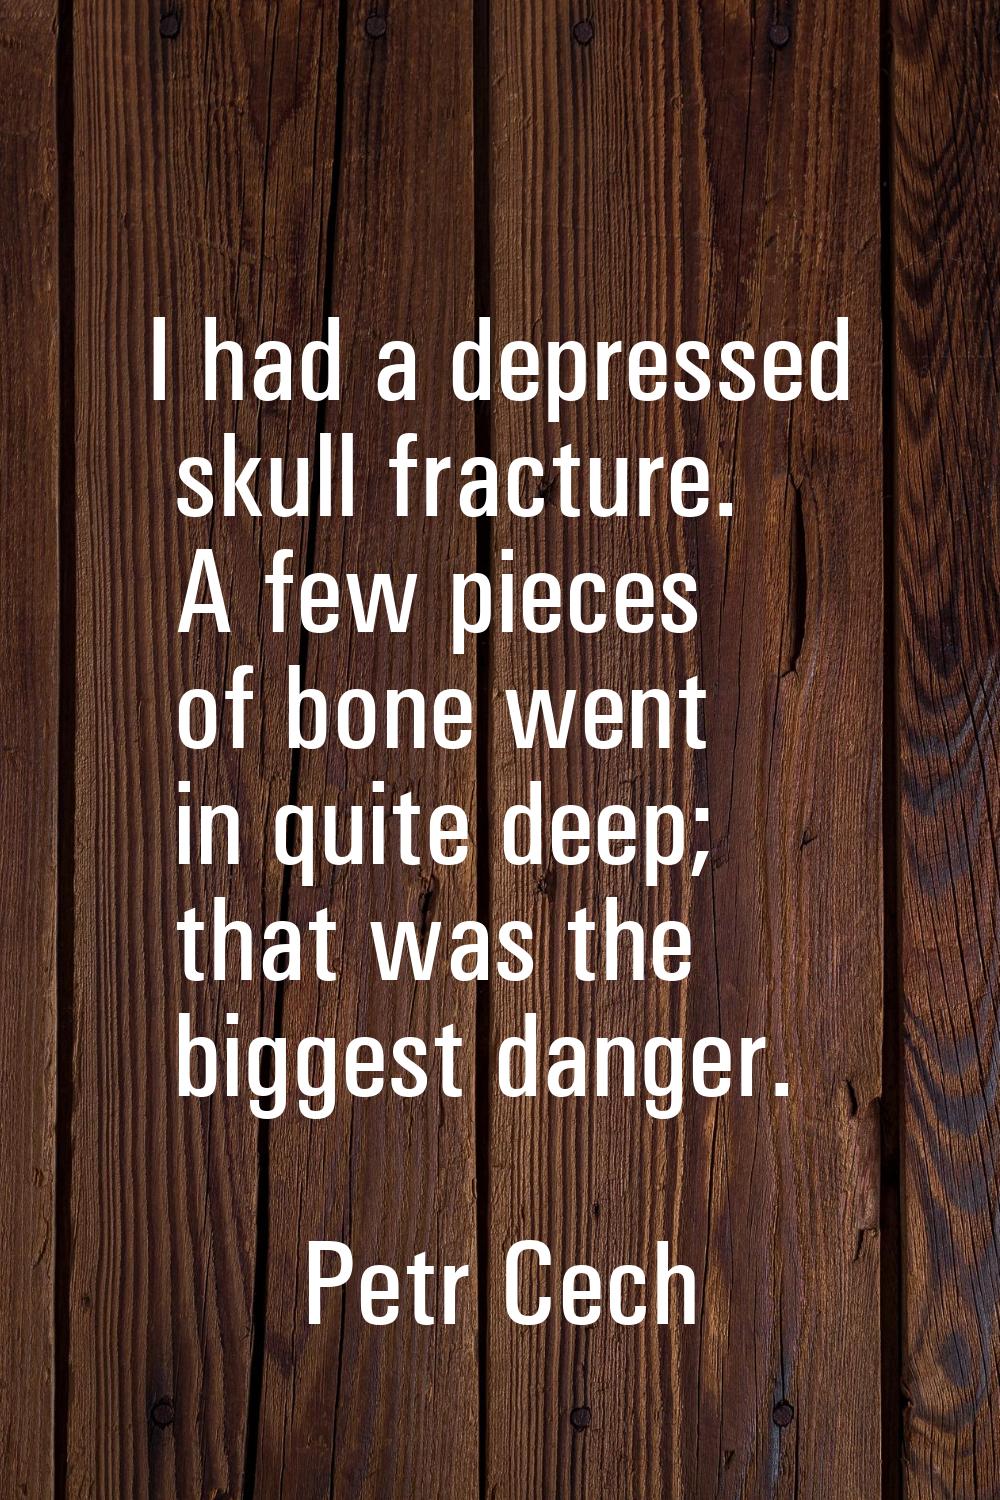 I had a depressed skull fracture. A few pieces of bone went in quite deep; that was the biggest dan